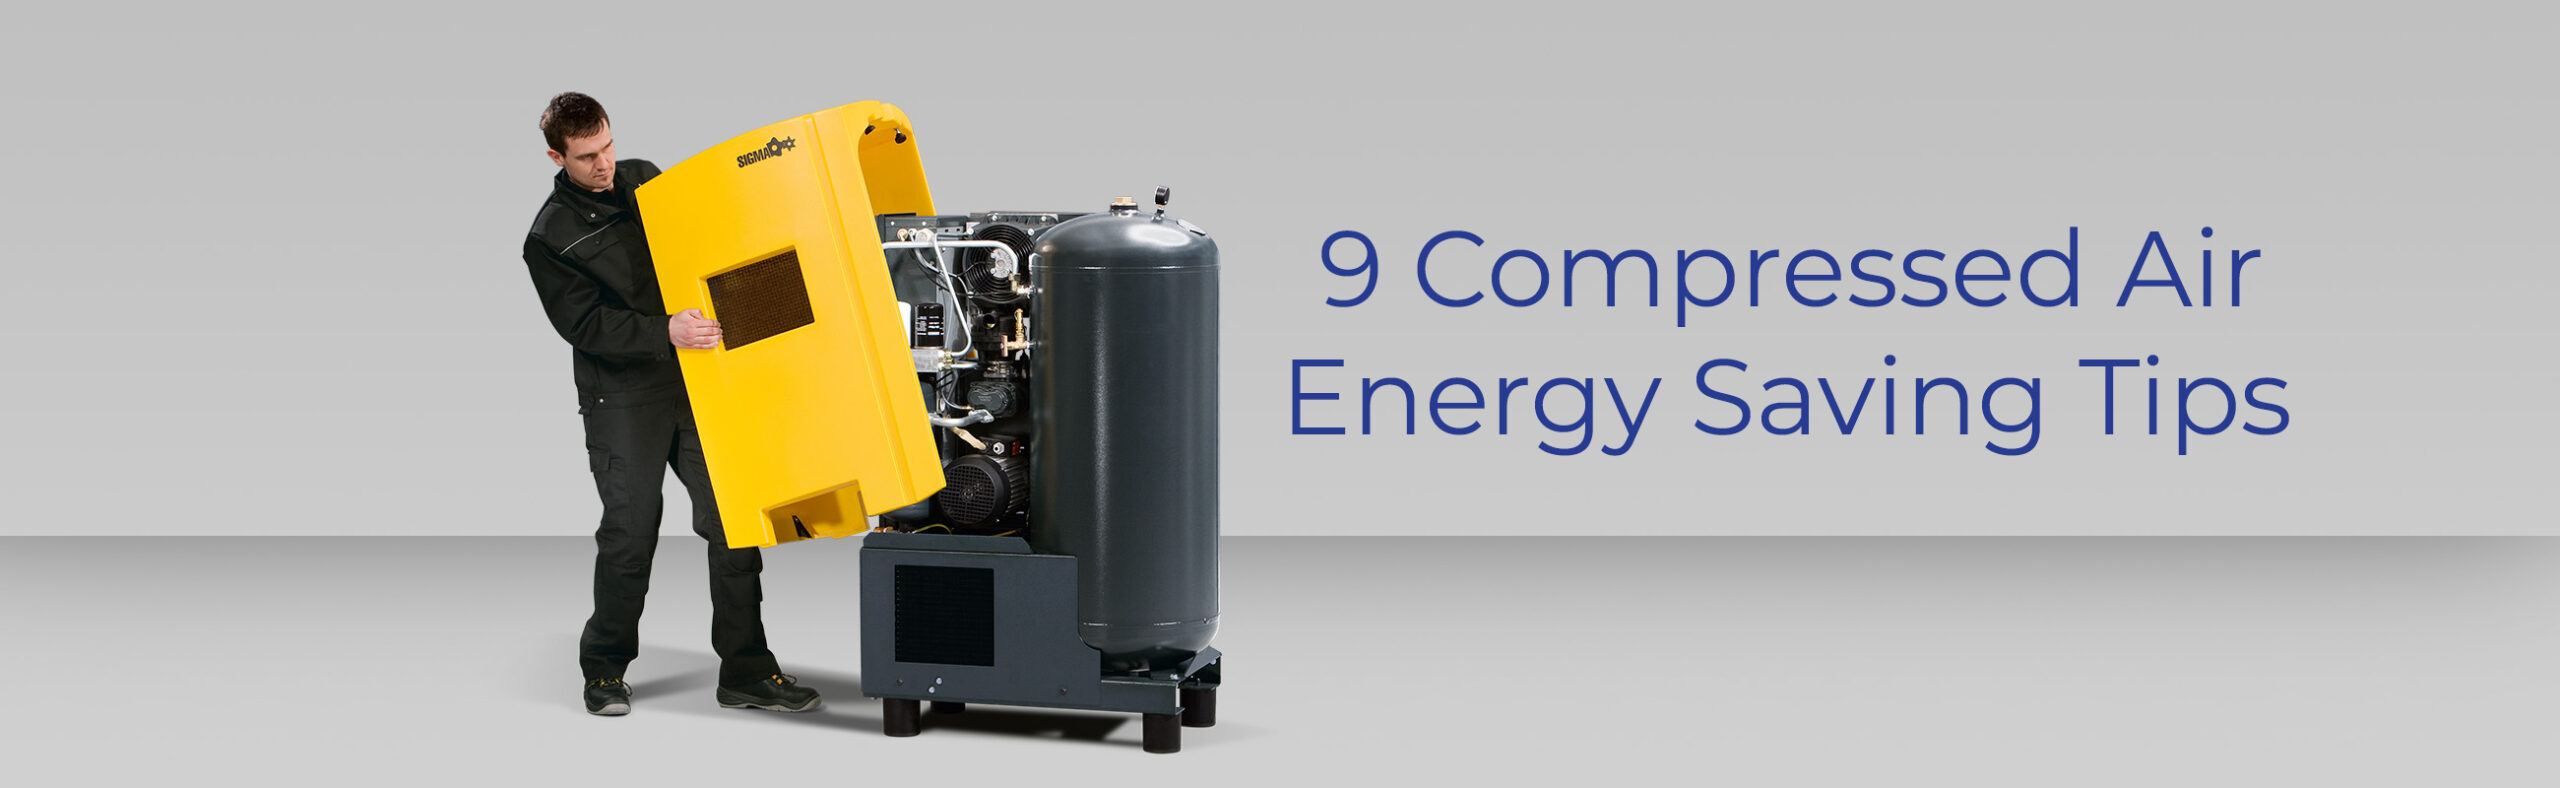 https://commercialaircompressor.ca/wp-content/uploads/2021/09/9-Compressed-Air-Energy-Saving-Tips-scaled.jpg